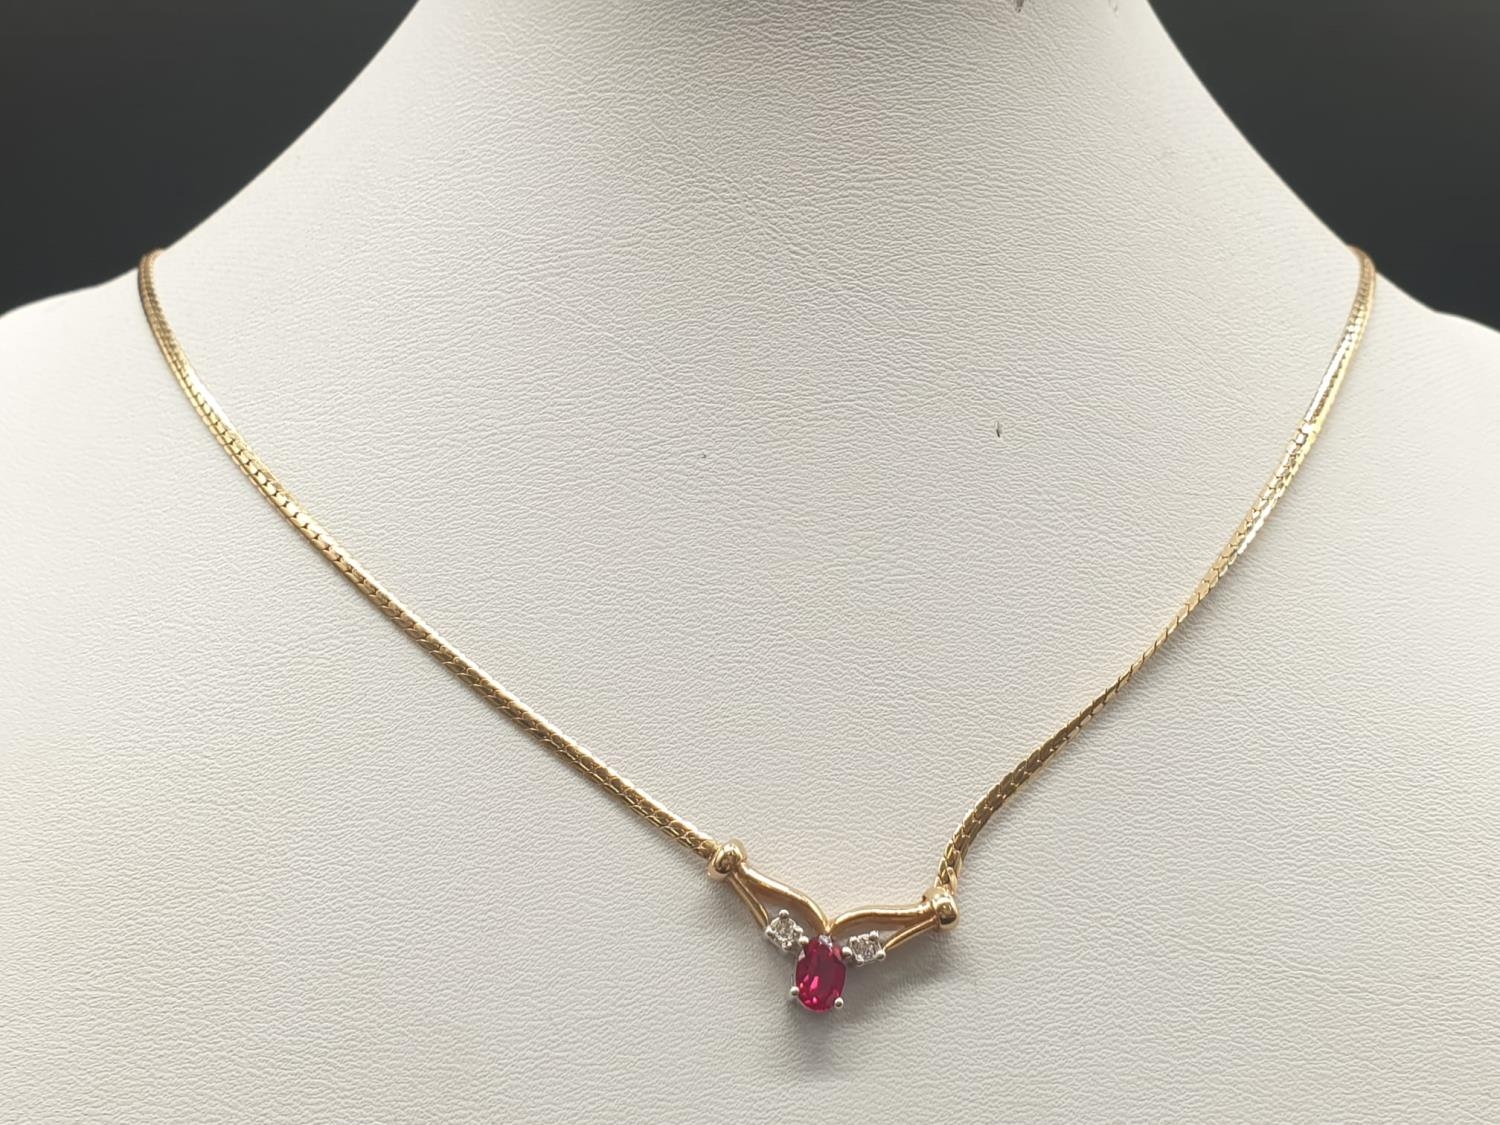 9K YELLOW GOLD SET WITH DIAMOND AND RED STONE NECKLACE, WEIGHT 6G AND 40CM LONG APPROZ - Image 7 of 7